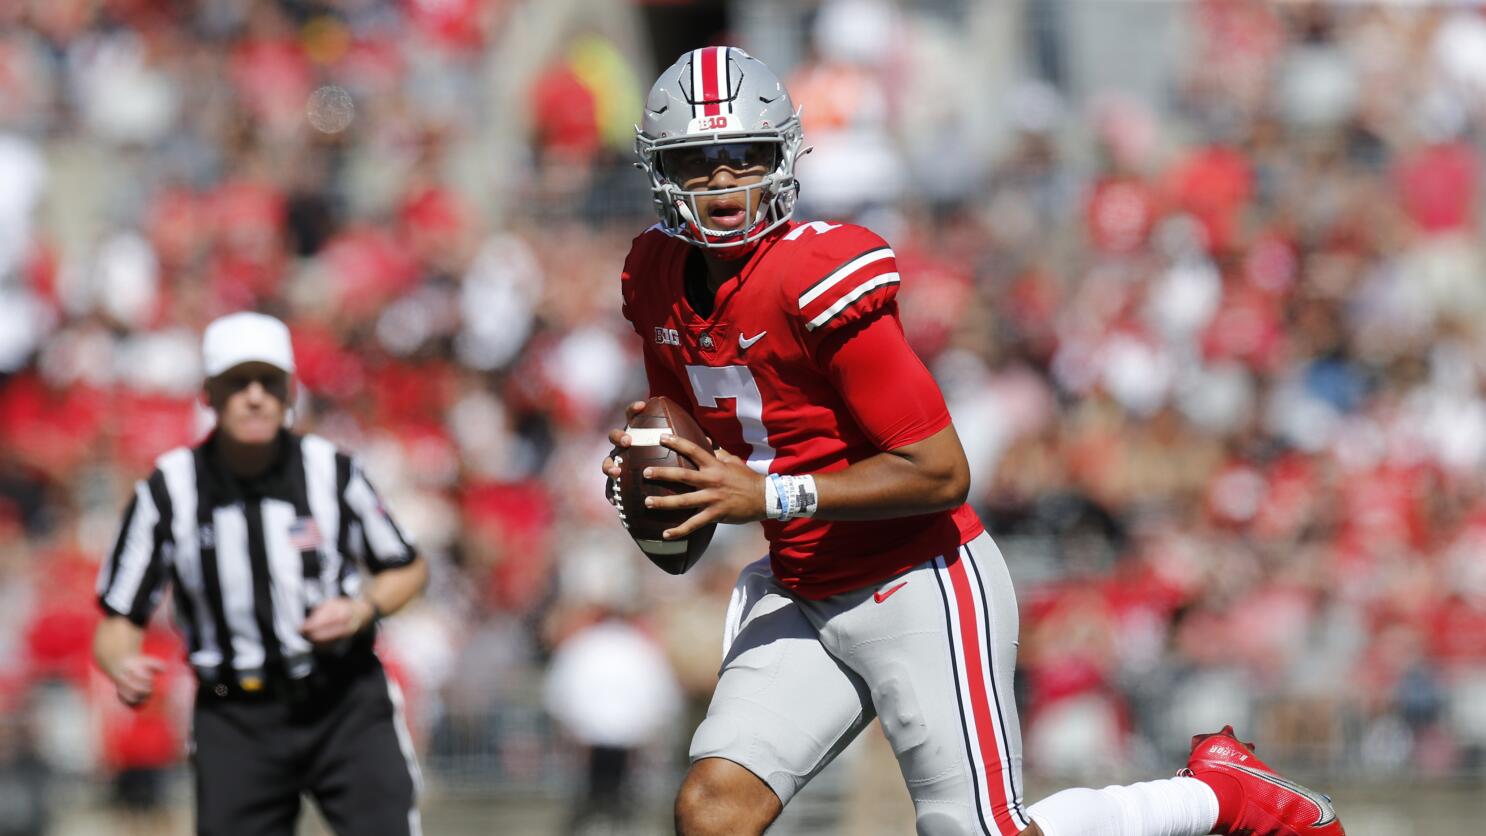 A History of Ohio State Alternate Uniforms